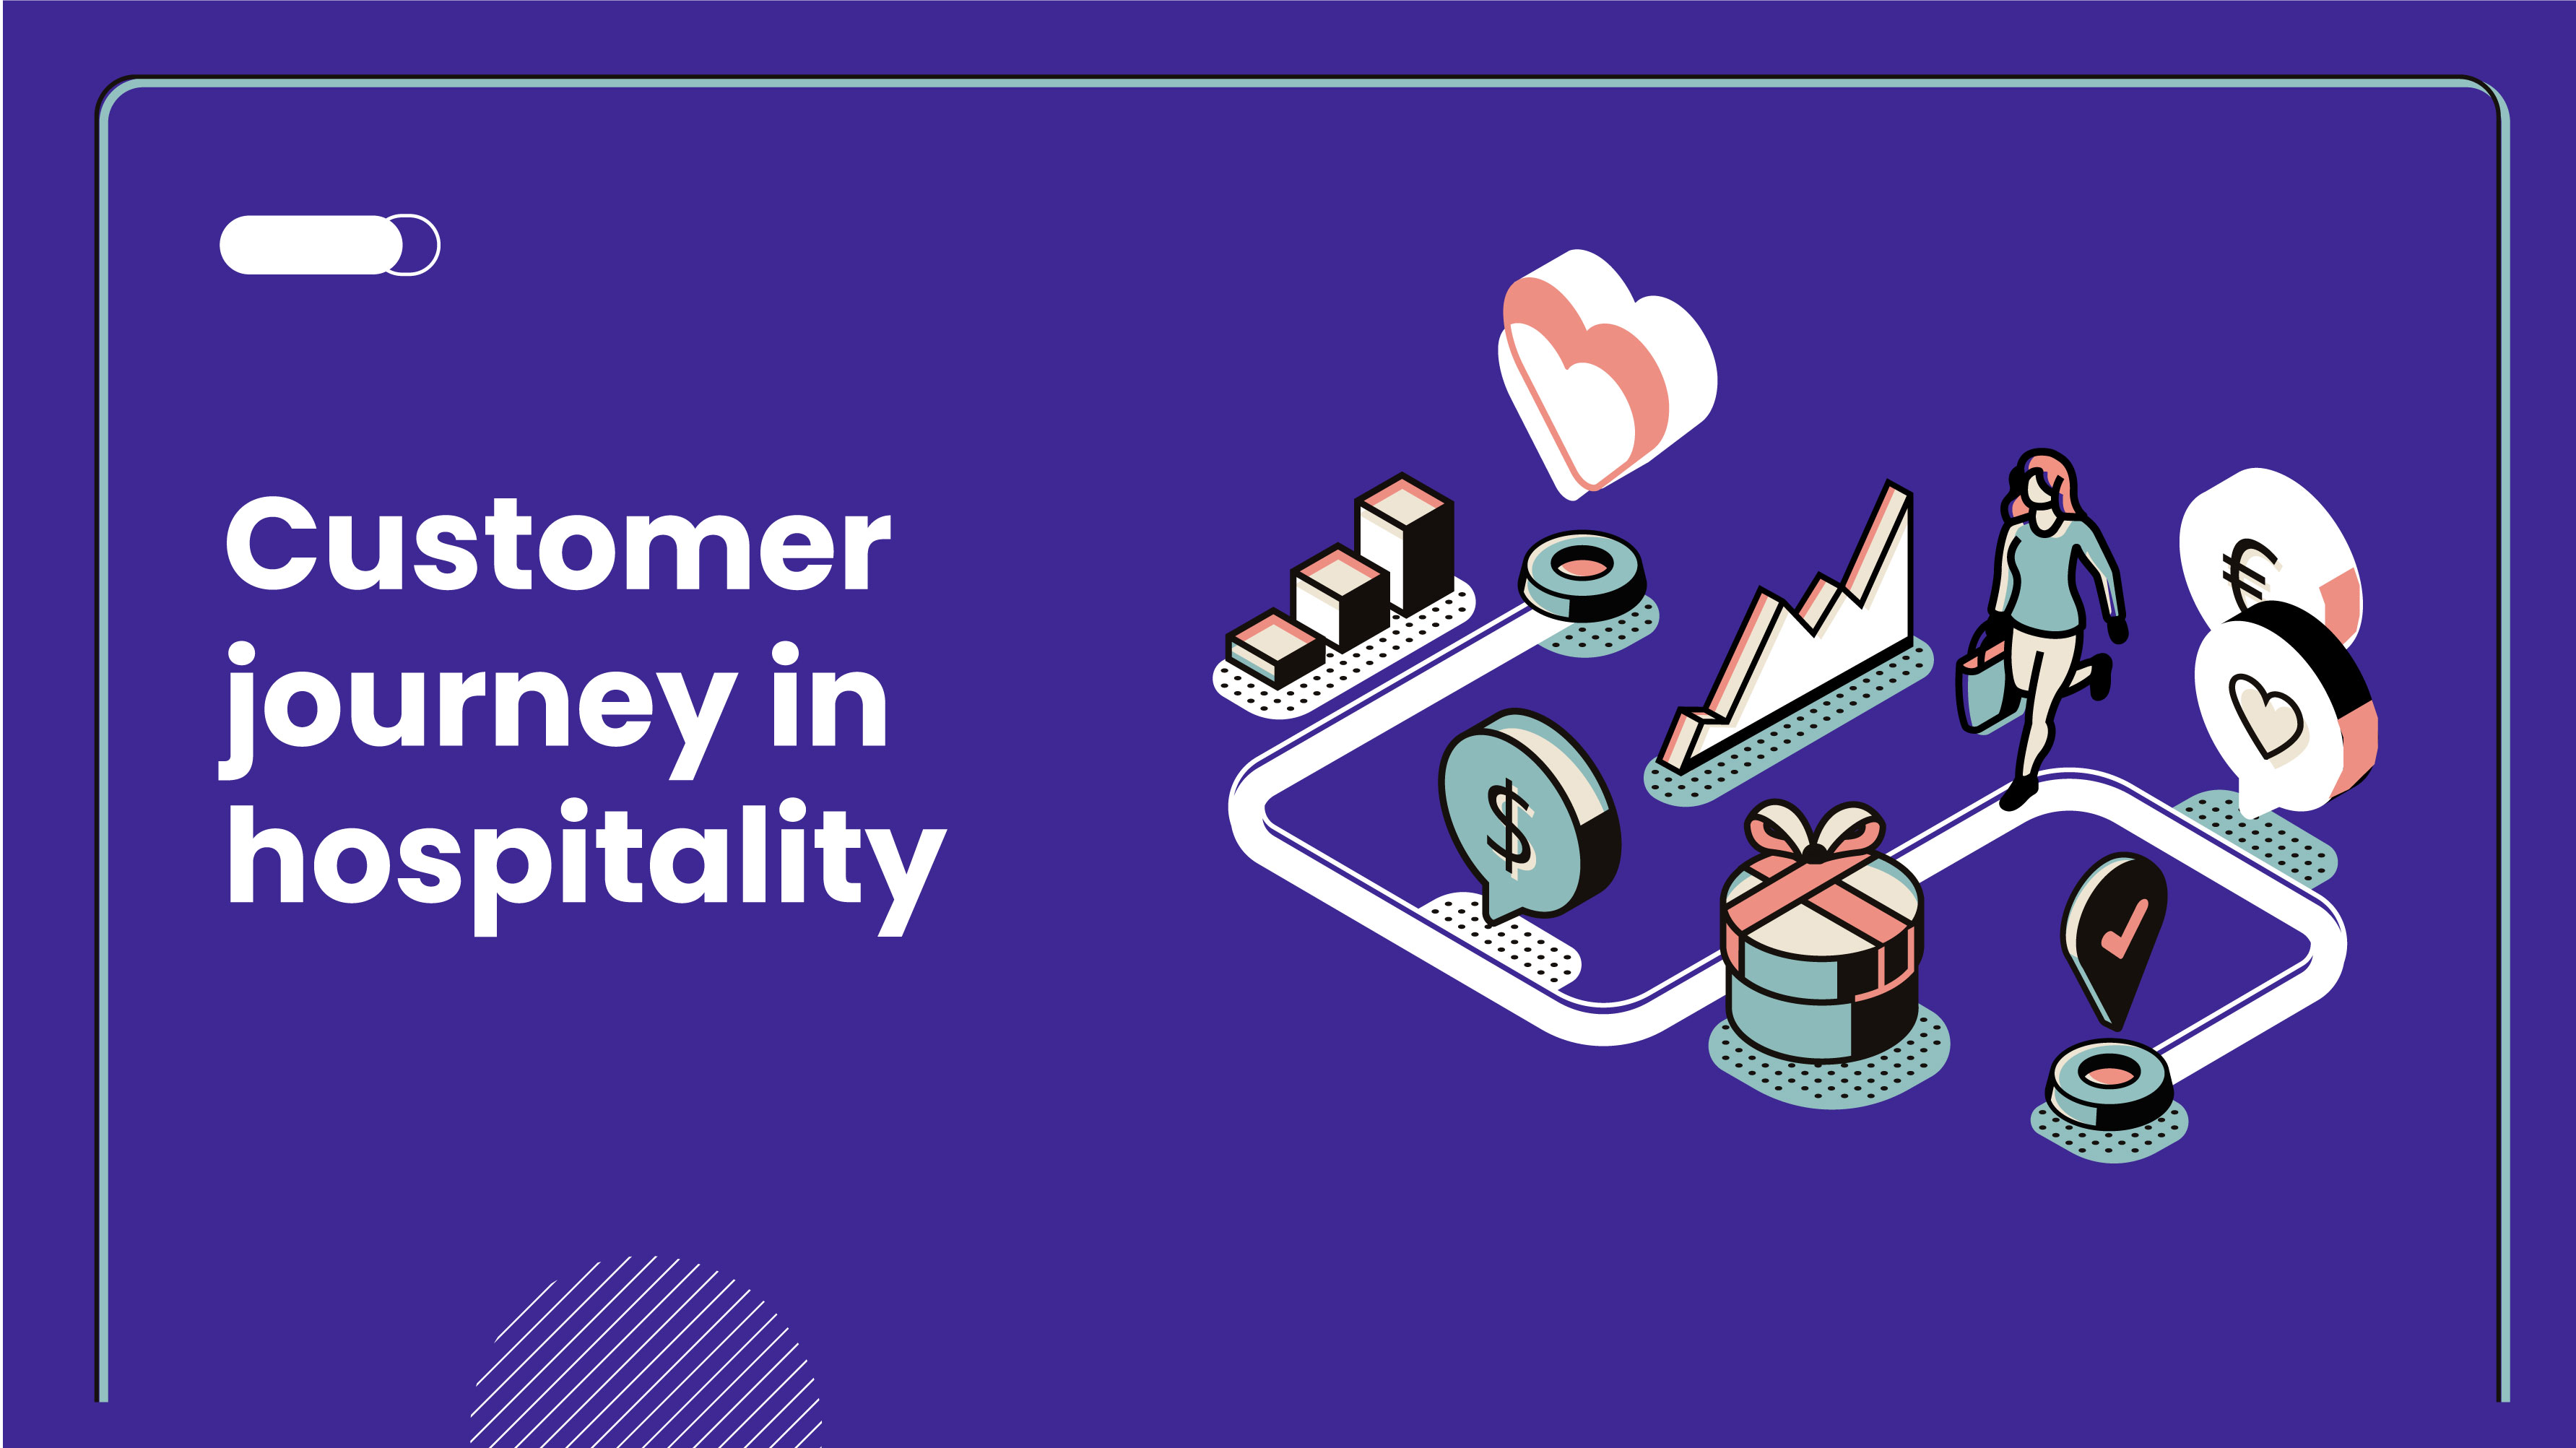 what is the customer journey in hospitality? | BTRESTRO